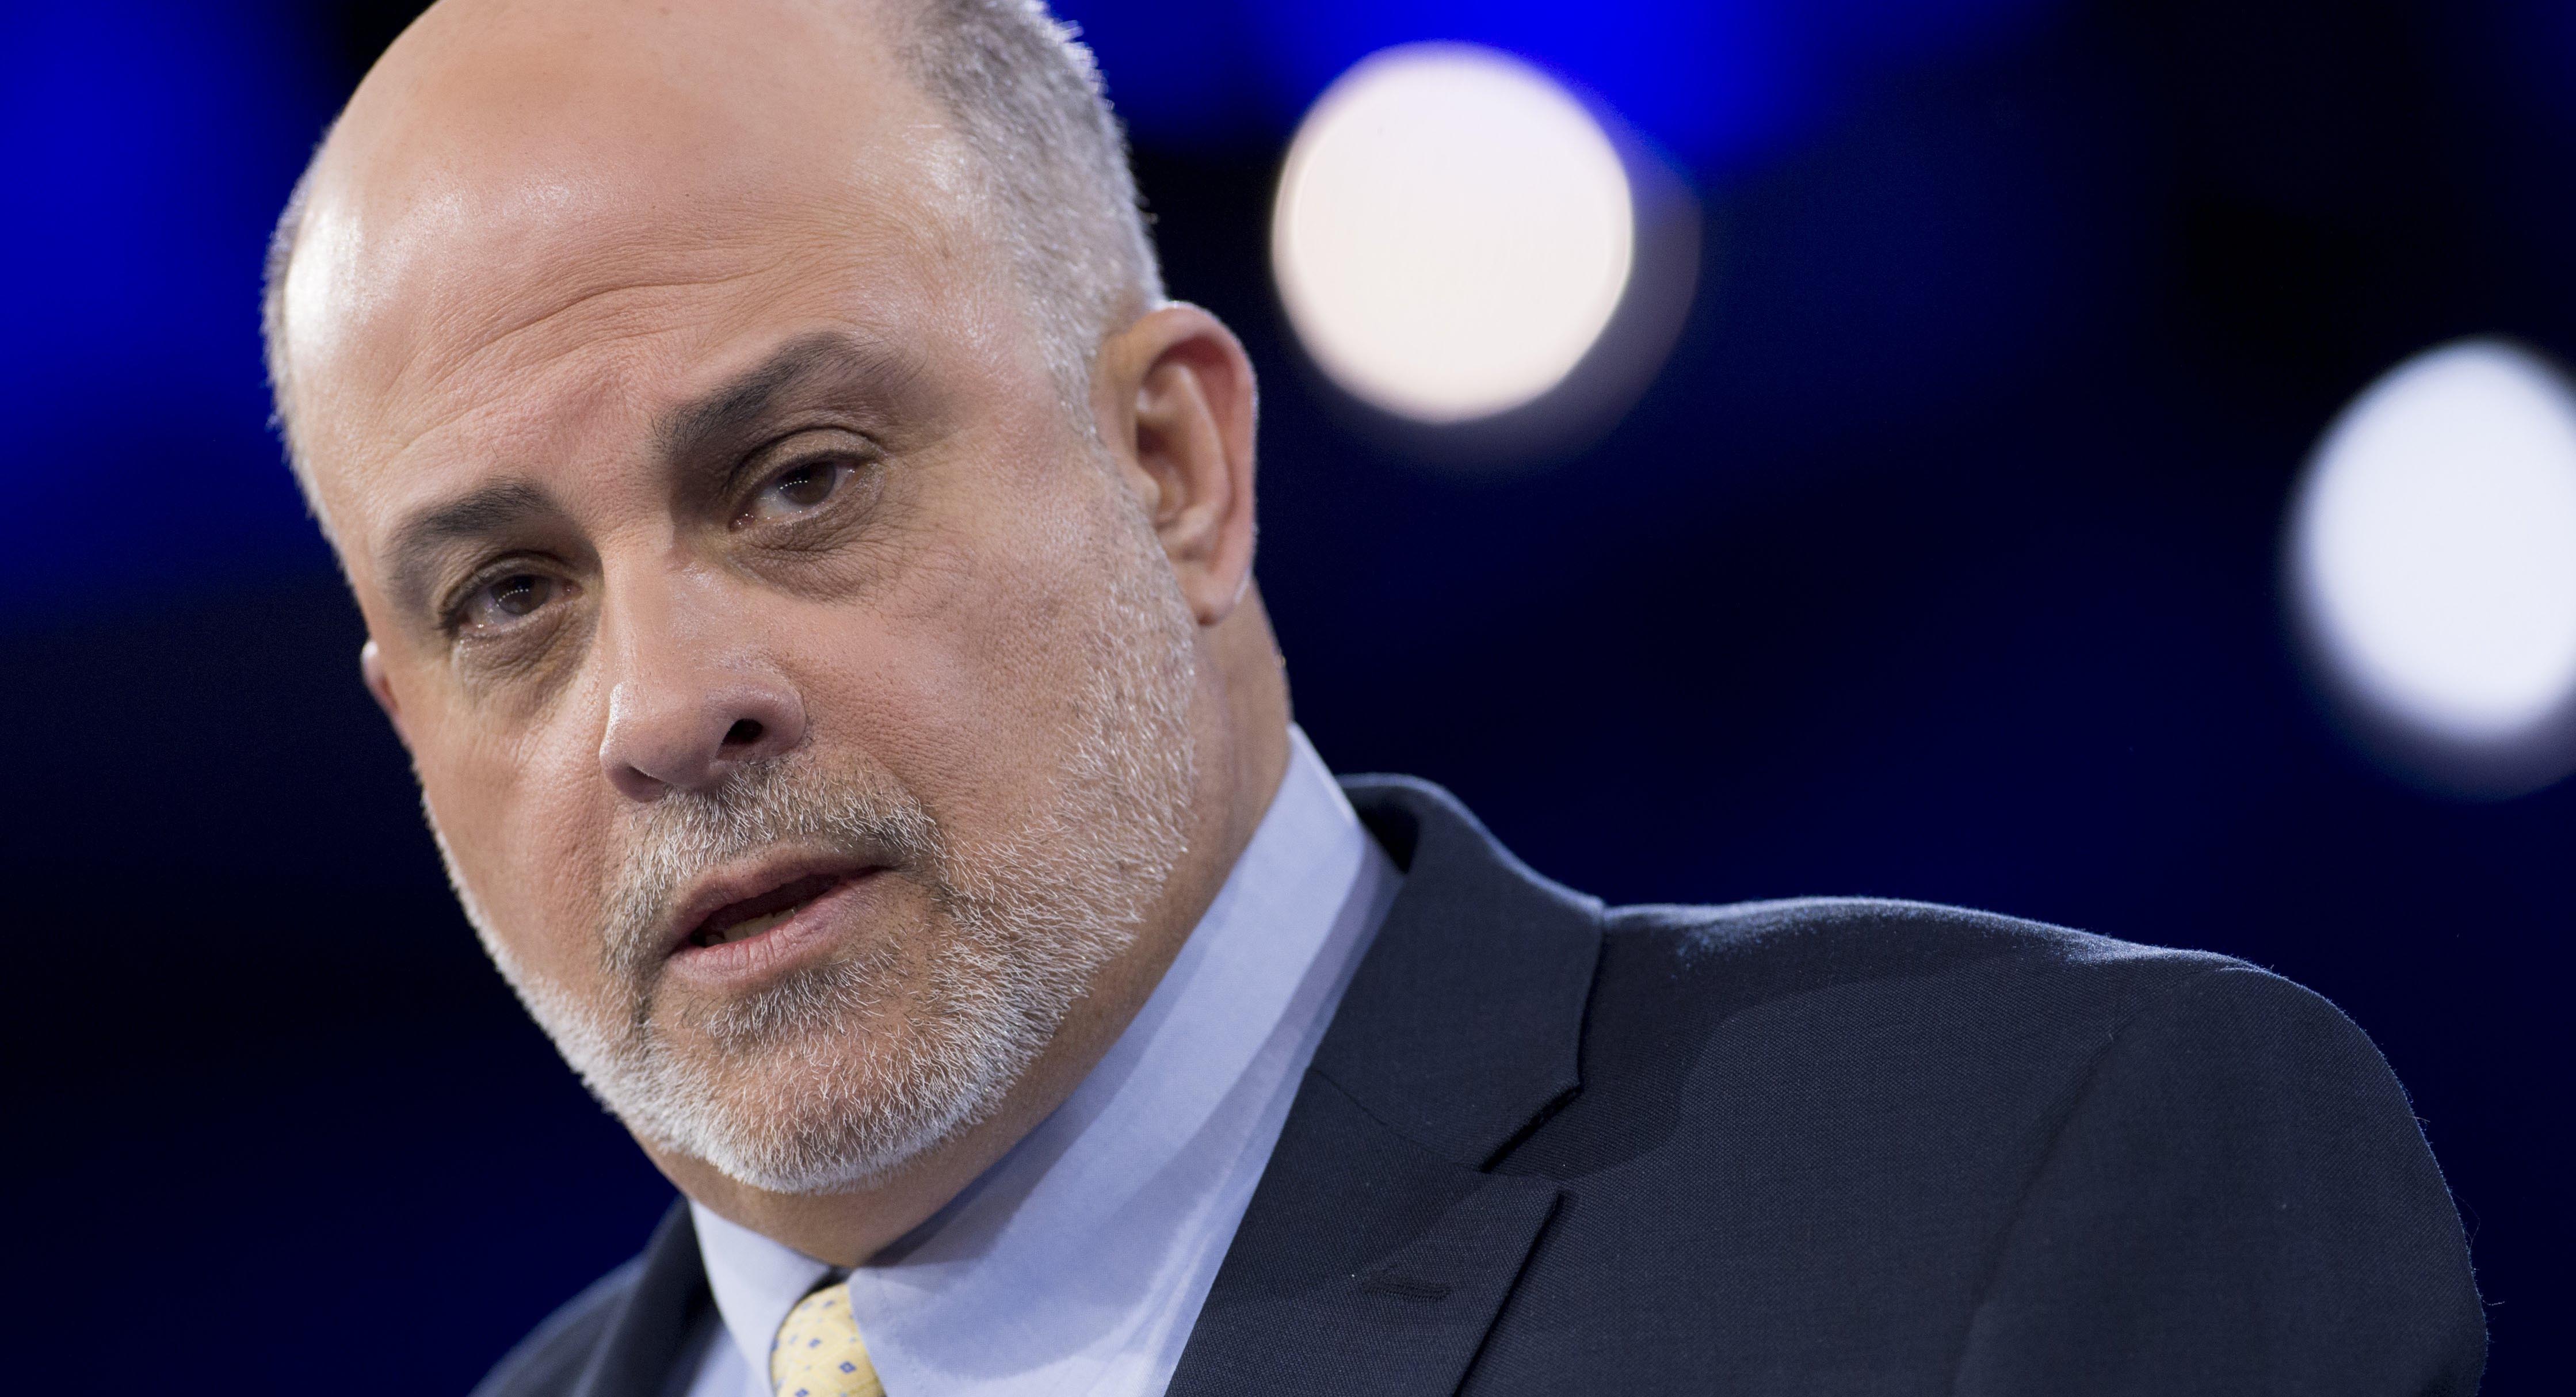 Mark Levin wearing a suit on a shirt and tie